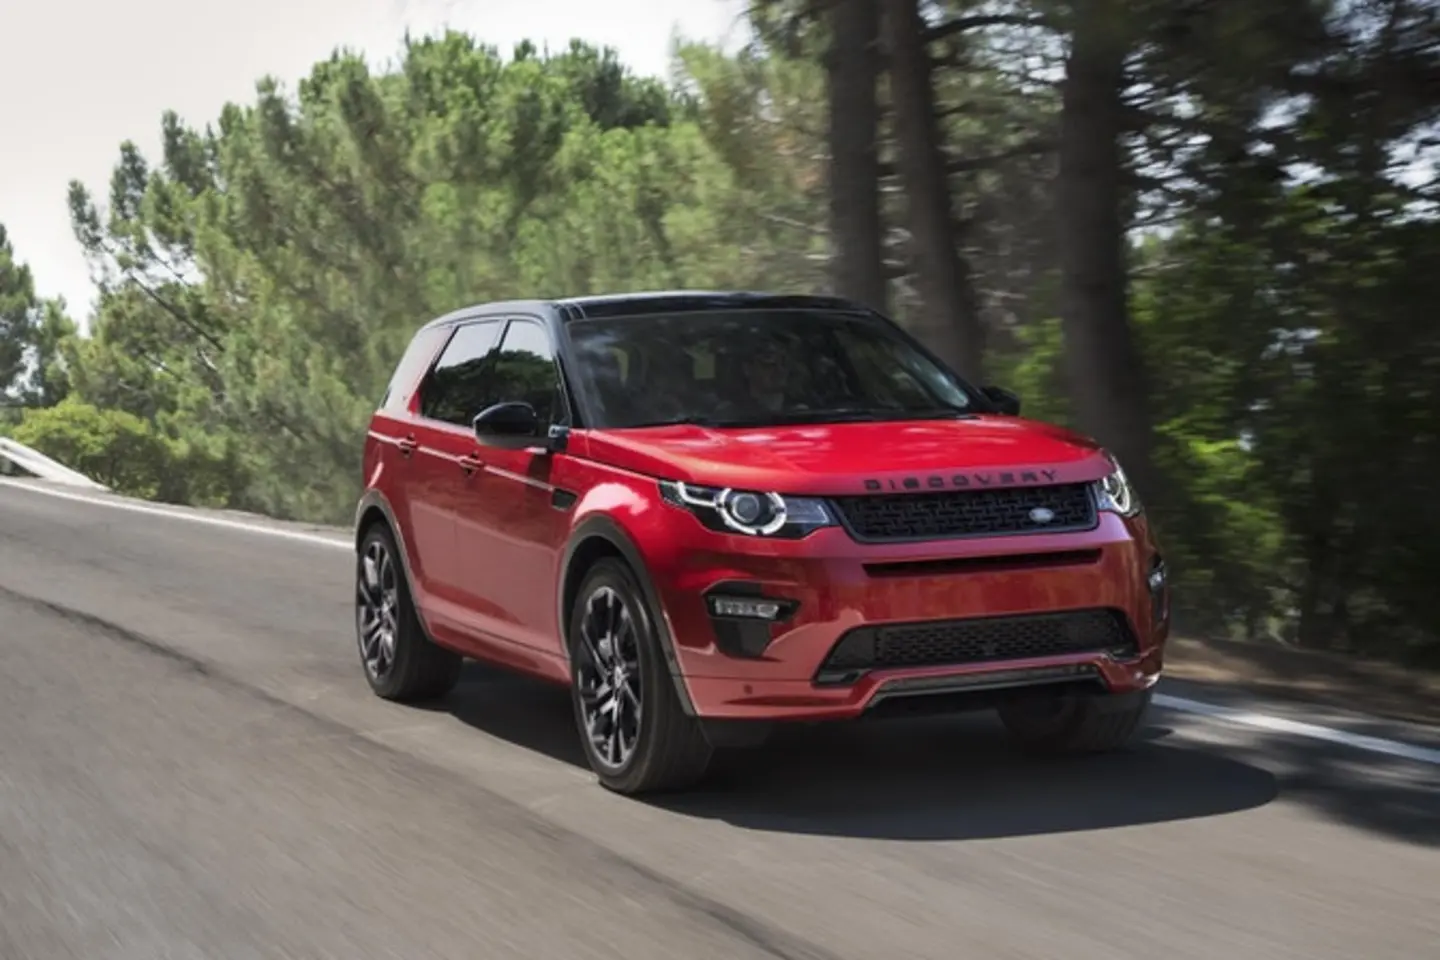 The exterior of a red Land Rover Discovery Sport